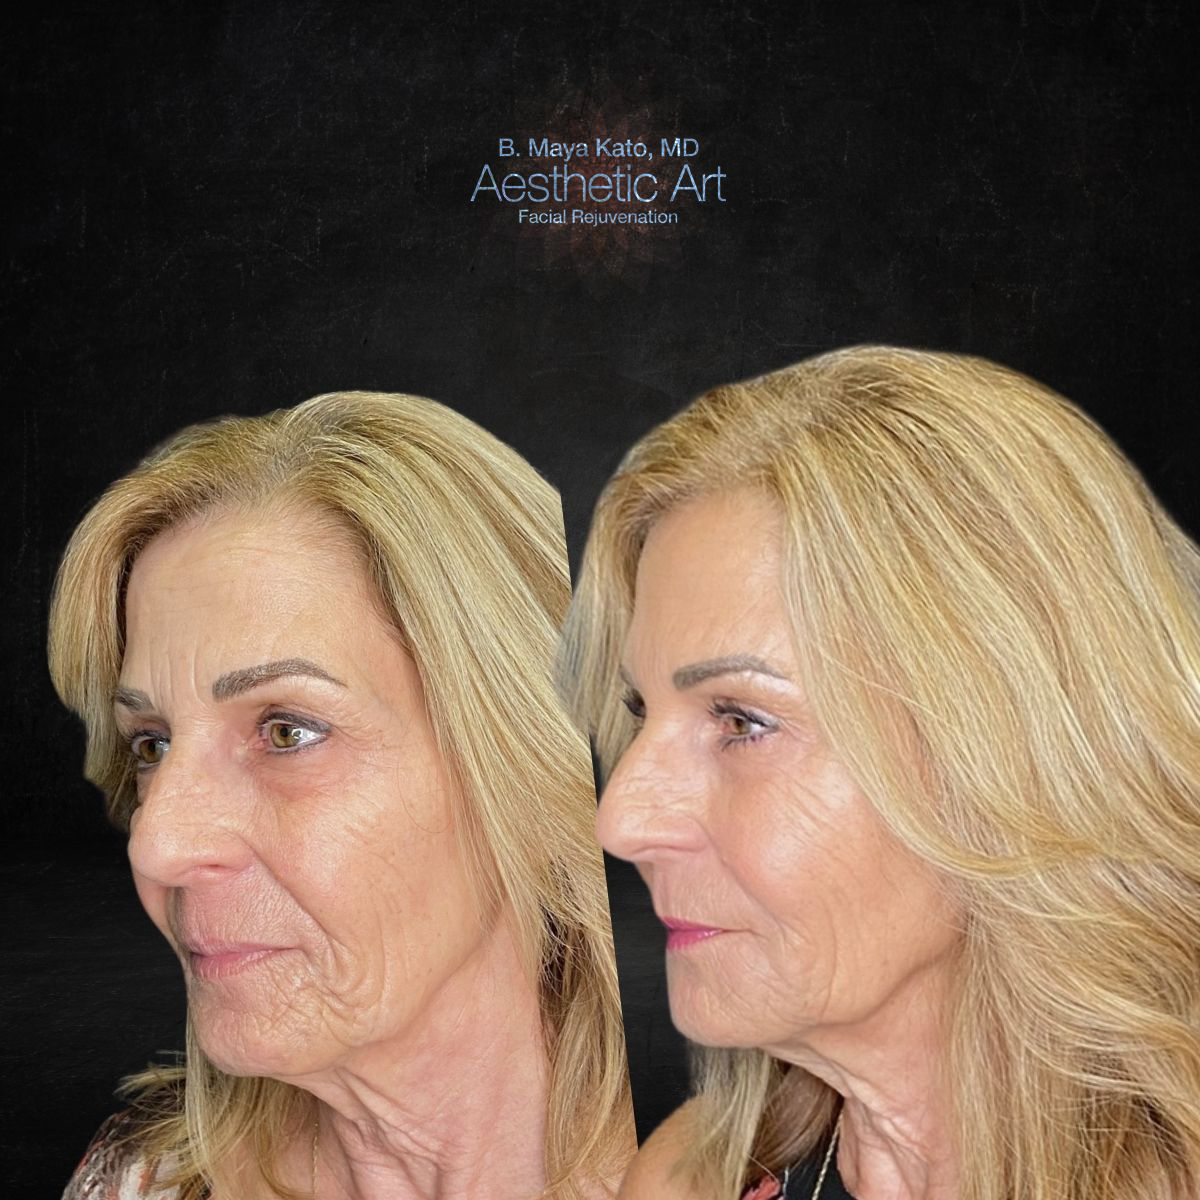 Juvéderm Transform Your Appearance with Dermal Fillers Aesthetic Art Dr Maya Kato